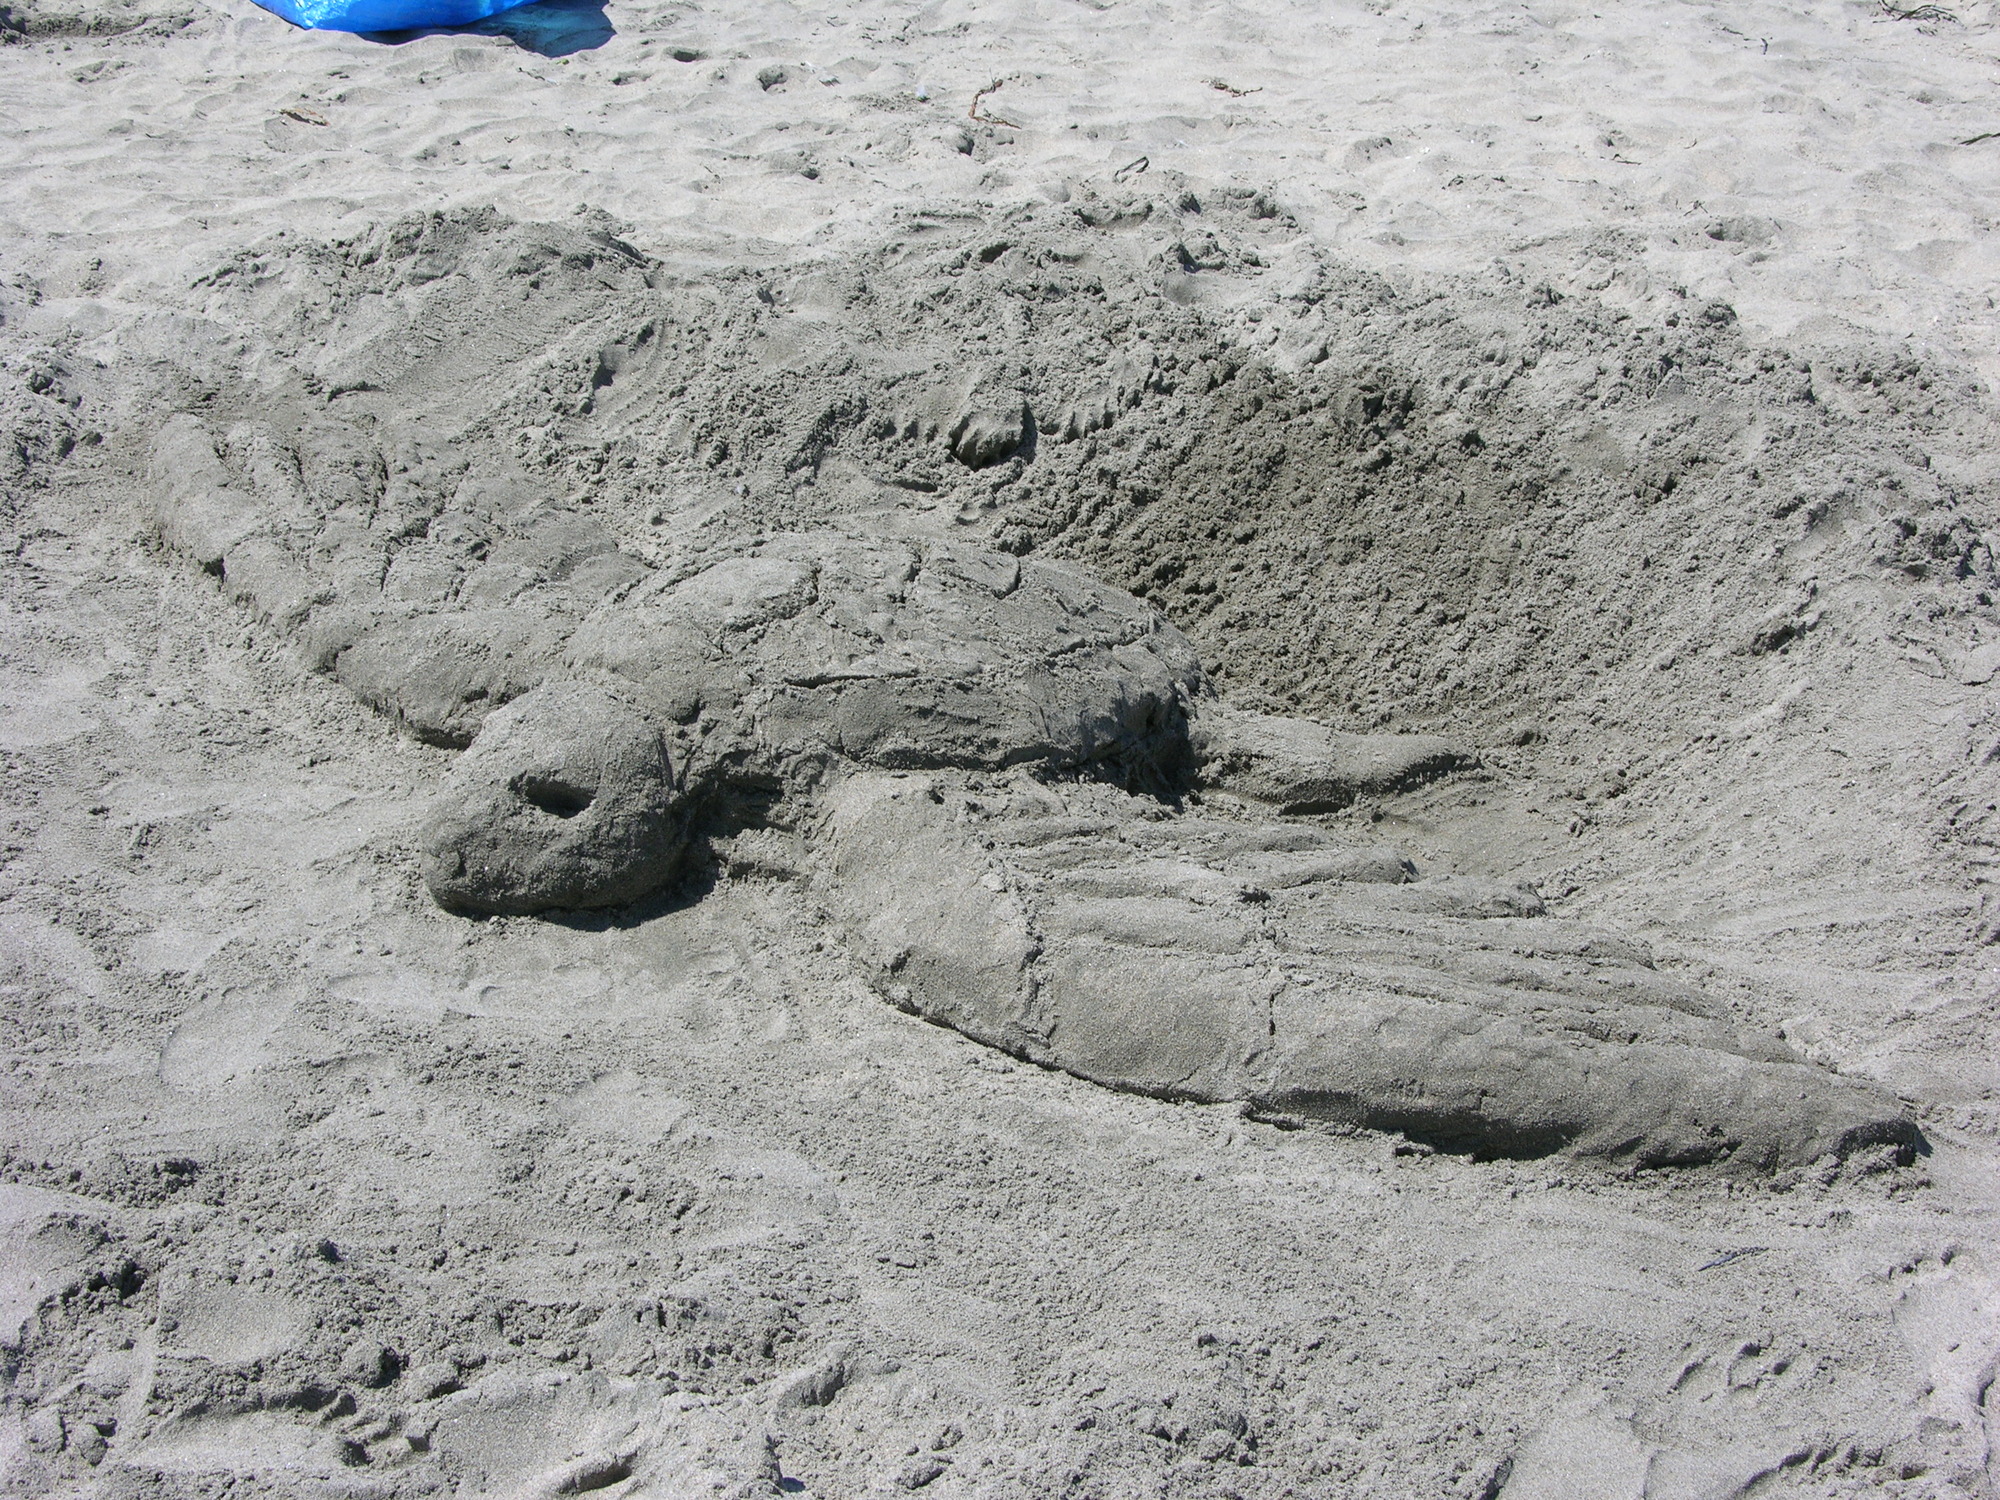 A sand sculpture of a sea turtle with feathered, bird-like pectoral fins.